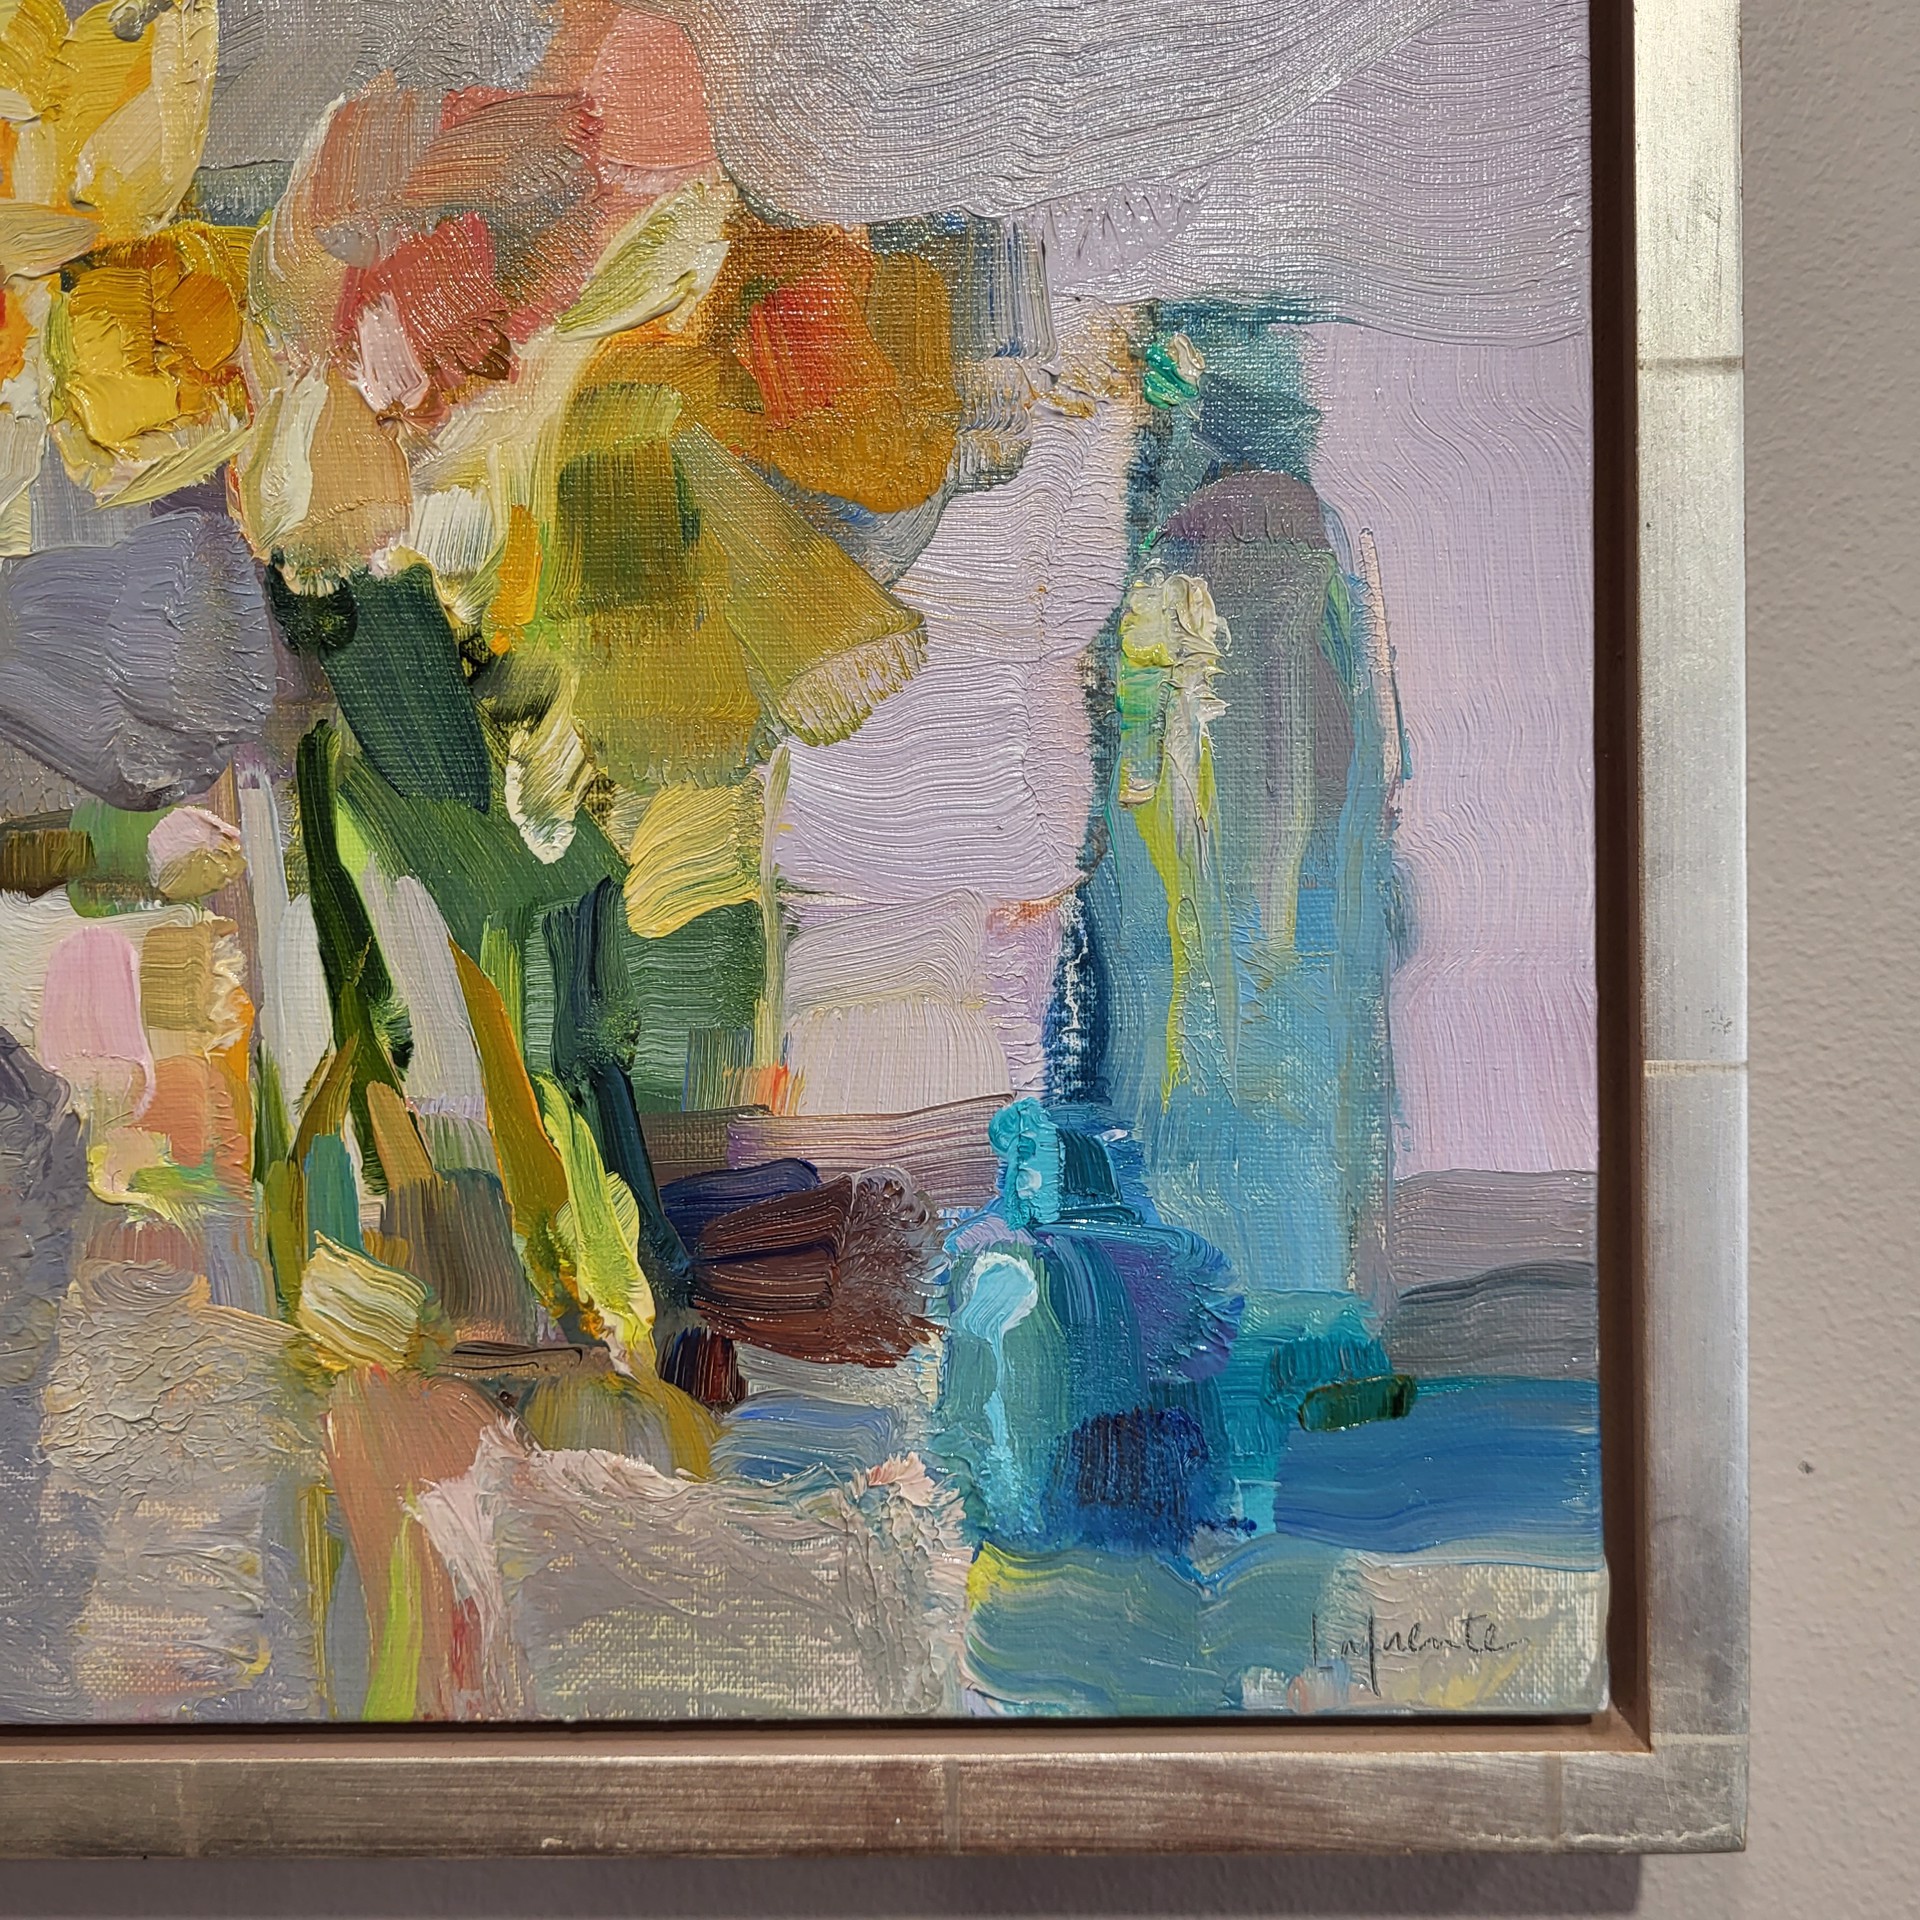 DAFFODILS AND BLUE BOTTLES by CHRISTINE LAFUENTE